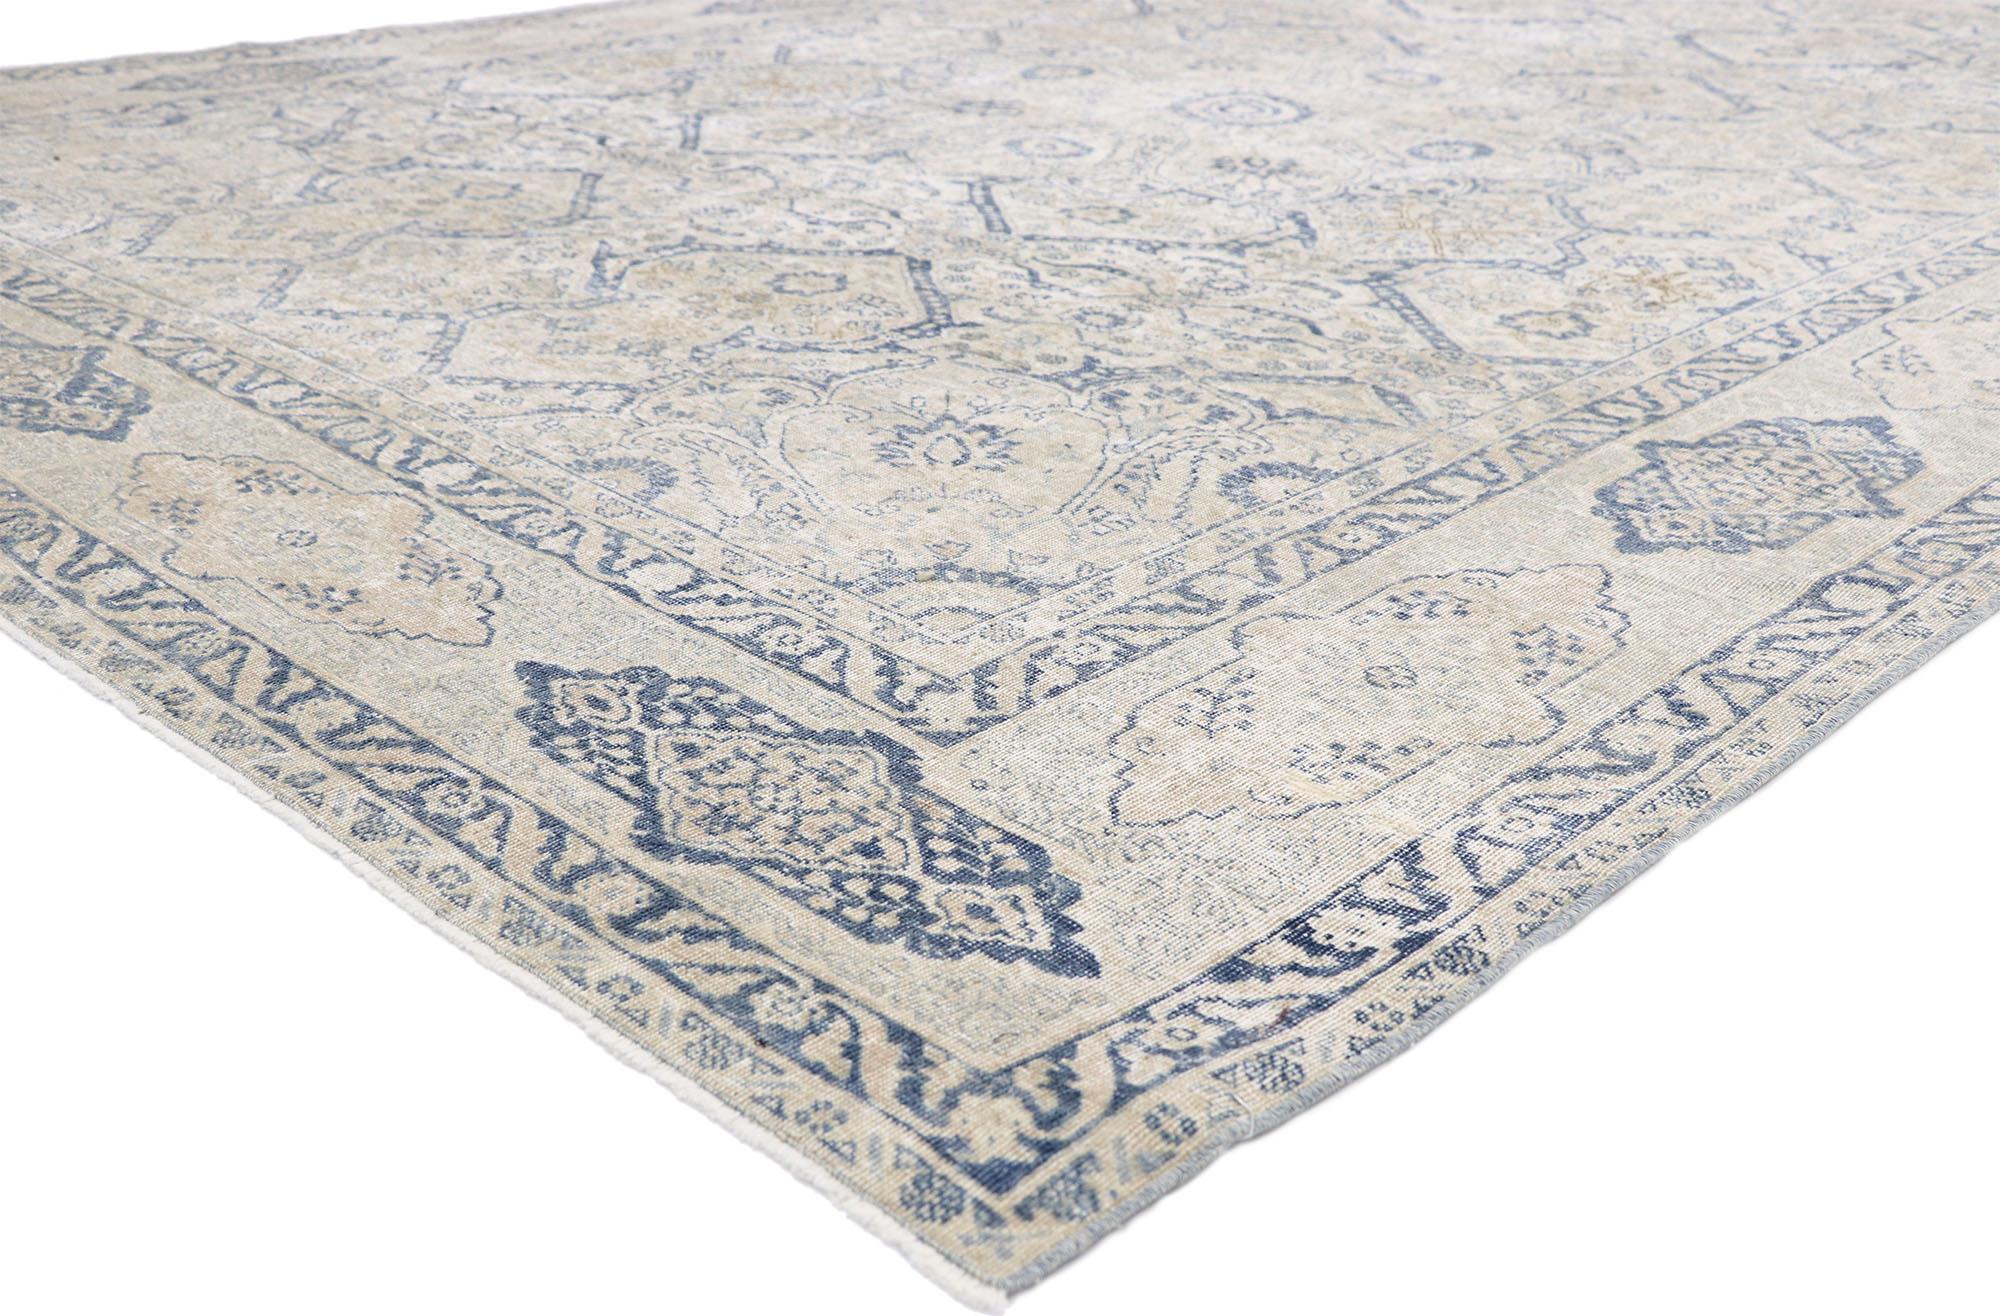 52552, distressed antique Turkish Tabriz rug with neoclassical Gustavian style. Drawing inspiration from French formality and Swedish simplicity, this hand knotted wool distressed antique Turkish Tabriz rug beautifully embodies Gustavian style. A